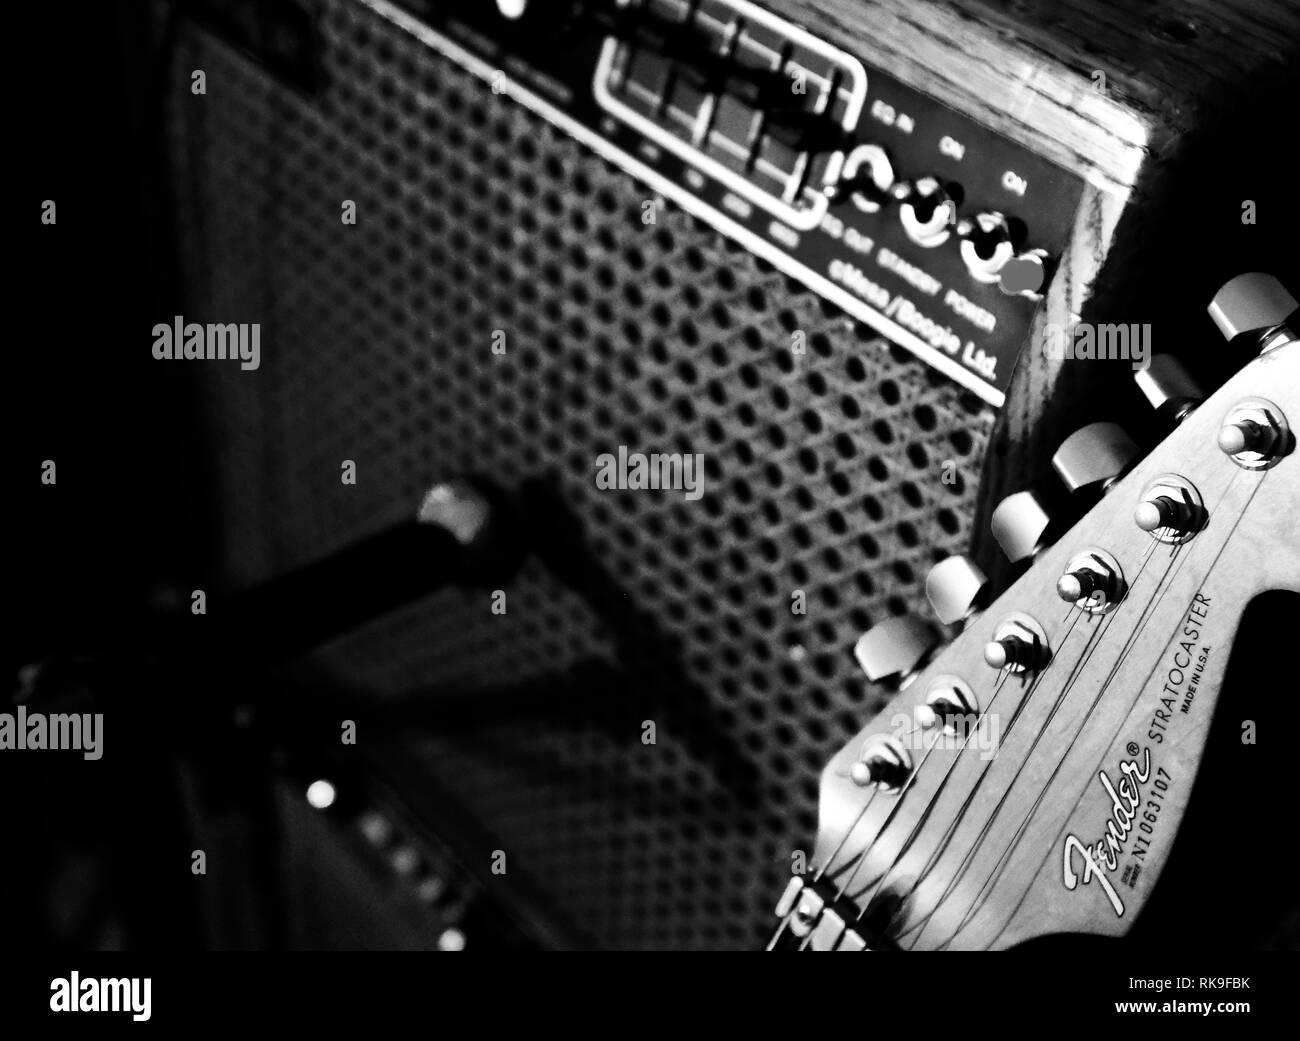 Fender Stratocaster and amplifier in a professional recording studio Stock Photo